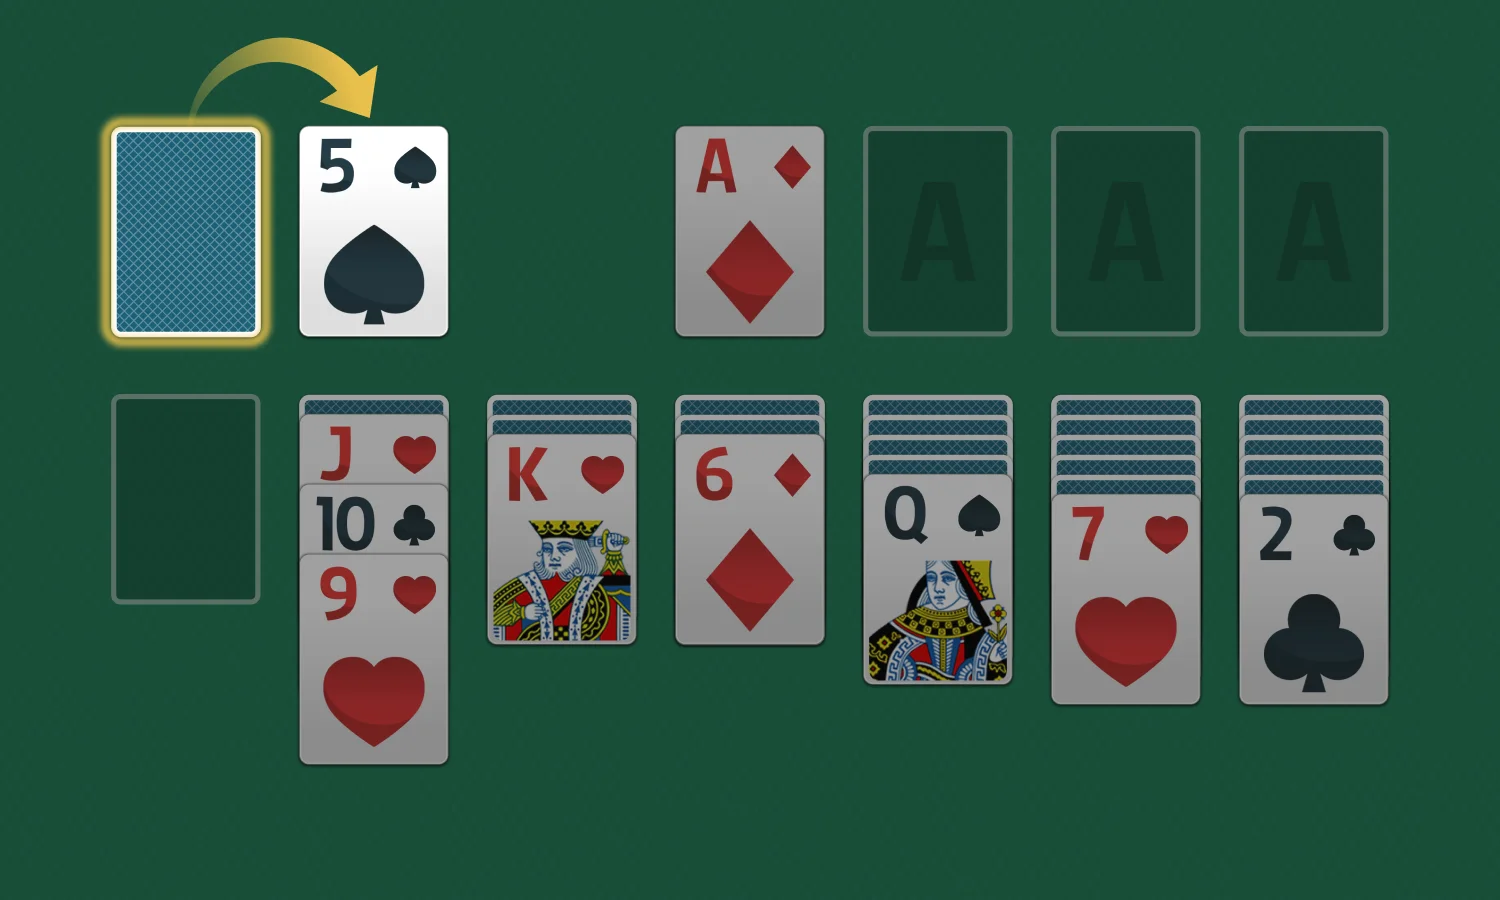 Solitaire Rules: Draw Cards from the Stockpile